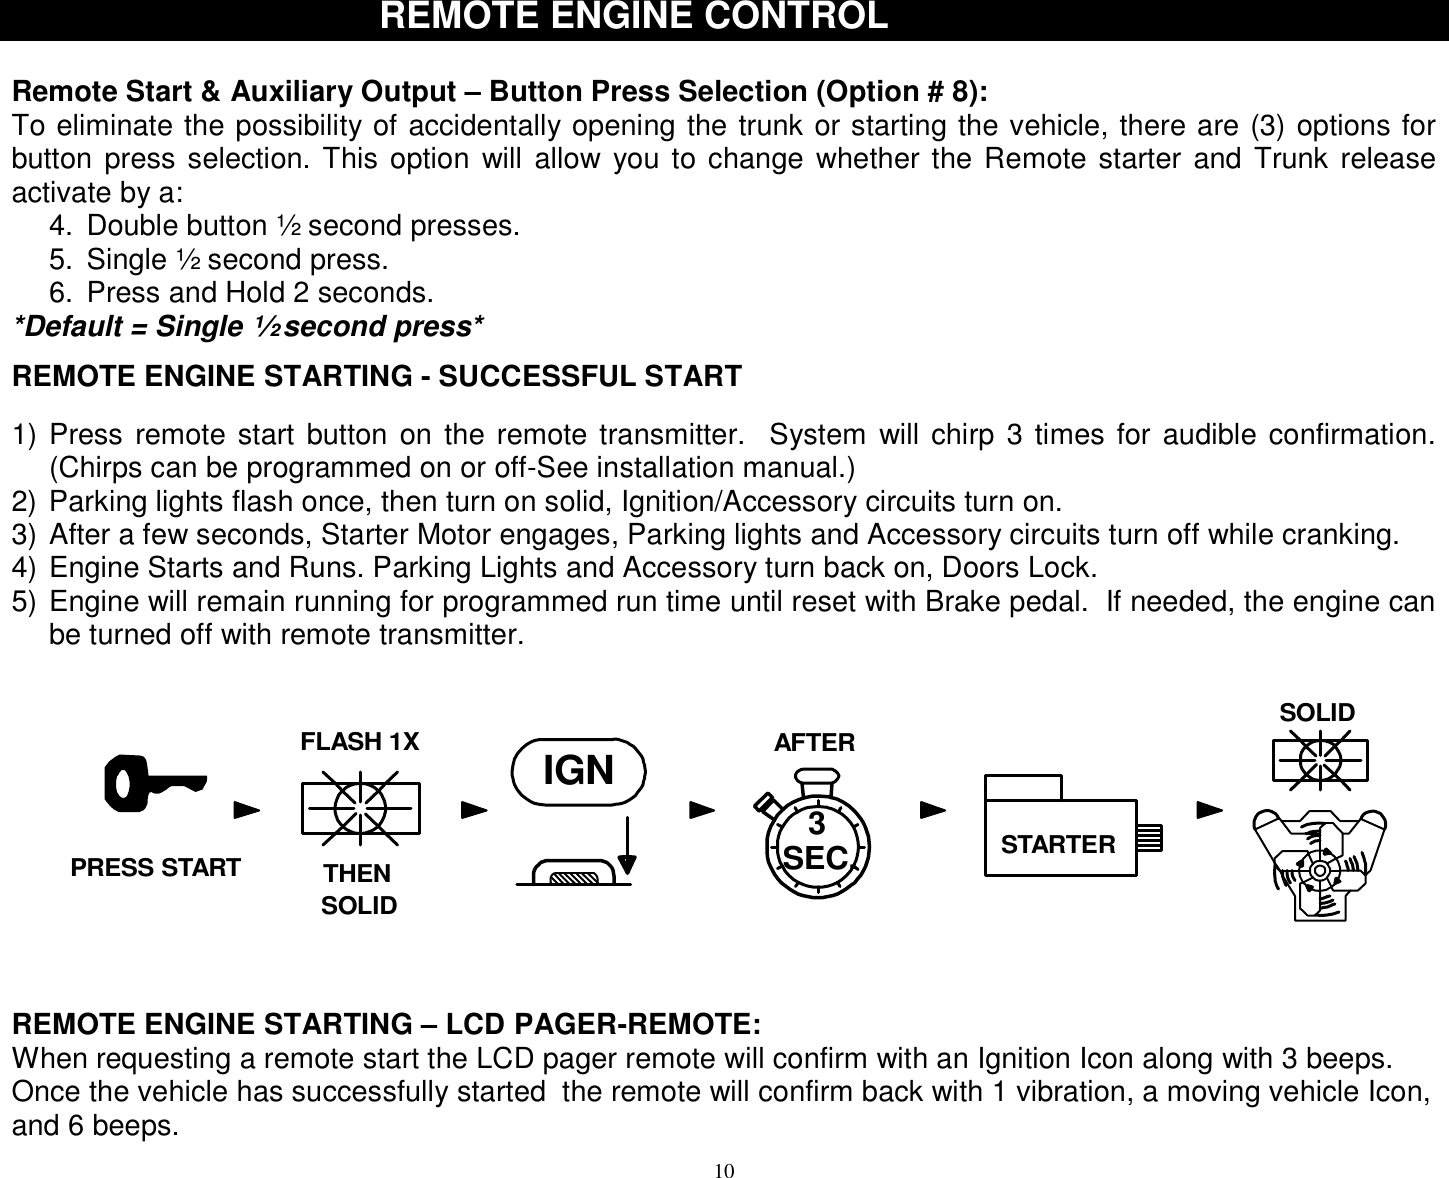  10 REMO REMOTE ENGINE CONTROLTE ENGINE CONTROL  Remote Start &amp; Auxiliary Output – Button Press Selection (Option # 8): To eliminate the possibility of accidentally opening the trunk or starting the vehicle, there are (3) options for button press selection. This option will allow you to change whether the Remote starter and Trunk release activate by a: 4. Double button ½ second presses. 5. Single ½ second press. 6. Press and Hold 2 seconds. *Default = Single ½ second press*  REMOTE ENGINE STARTING - SUCCESSFUL START  1) Press remote start button on the remote transmitter.  System will chirp 3 times for audible confirmation.  (Chirps can be programmed on or off-See installation manual.) 2) Parking lights flash once, then turn on solid, Ignition/Accessory circuits turn on. 3) After a few seconds, Starter Motor engages, Parking lights and Accessory circuits turn off while cranking. 4) Engine Starts and Runs. Parking Lights and Accessory turn back on, Doors Lock. 5) Engine will remain running for programmed run time until reset with Brake pedal.  If needed, the engine can be turned off with remote transmitter.   REMOTE ENGINE STARTING – LCD PAGER-REMOTE: When requesting a remote start the LCD pager remote will confirm with an Ignition Icon along with 3 beeps.  Once the vehicle has successfully started  the remote will confirm back with 1 vibration, a moving vehicle Icon, and 6 beeps.  AFTERIGN3STARTERTHENFLASH 1XSOLIDSOLIDSEC.PRESS START